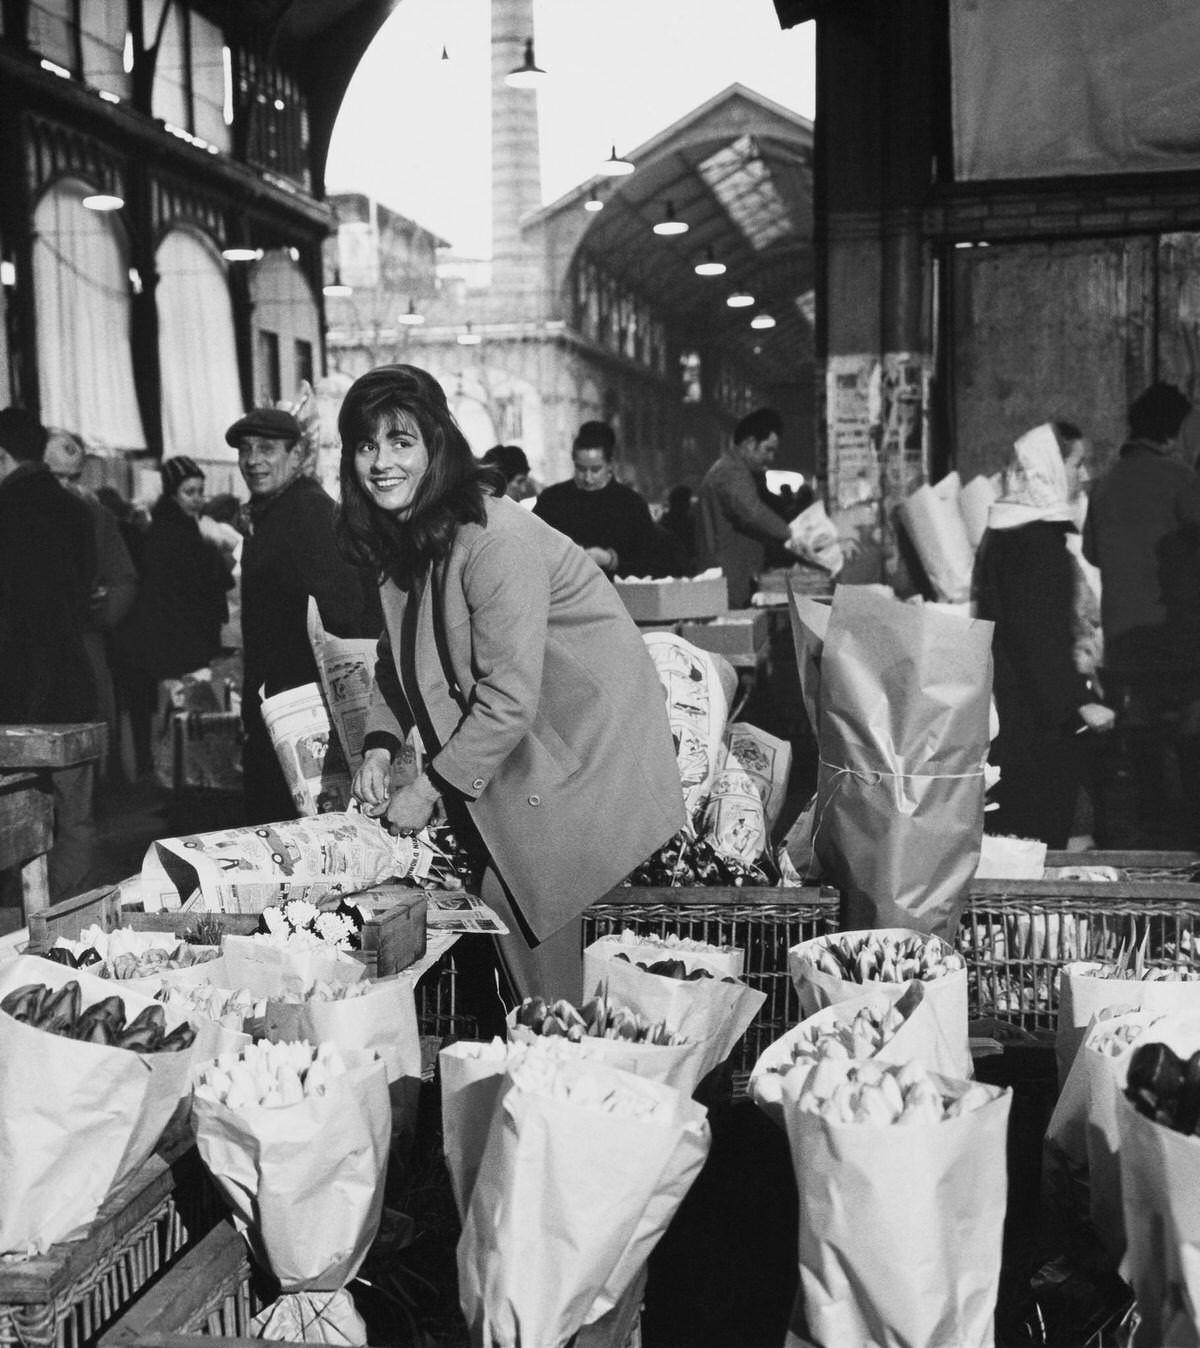 Purchase of Flowers Giving Merry, Les Halles, 1960s